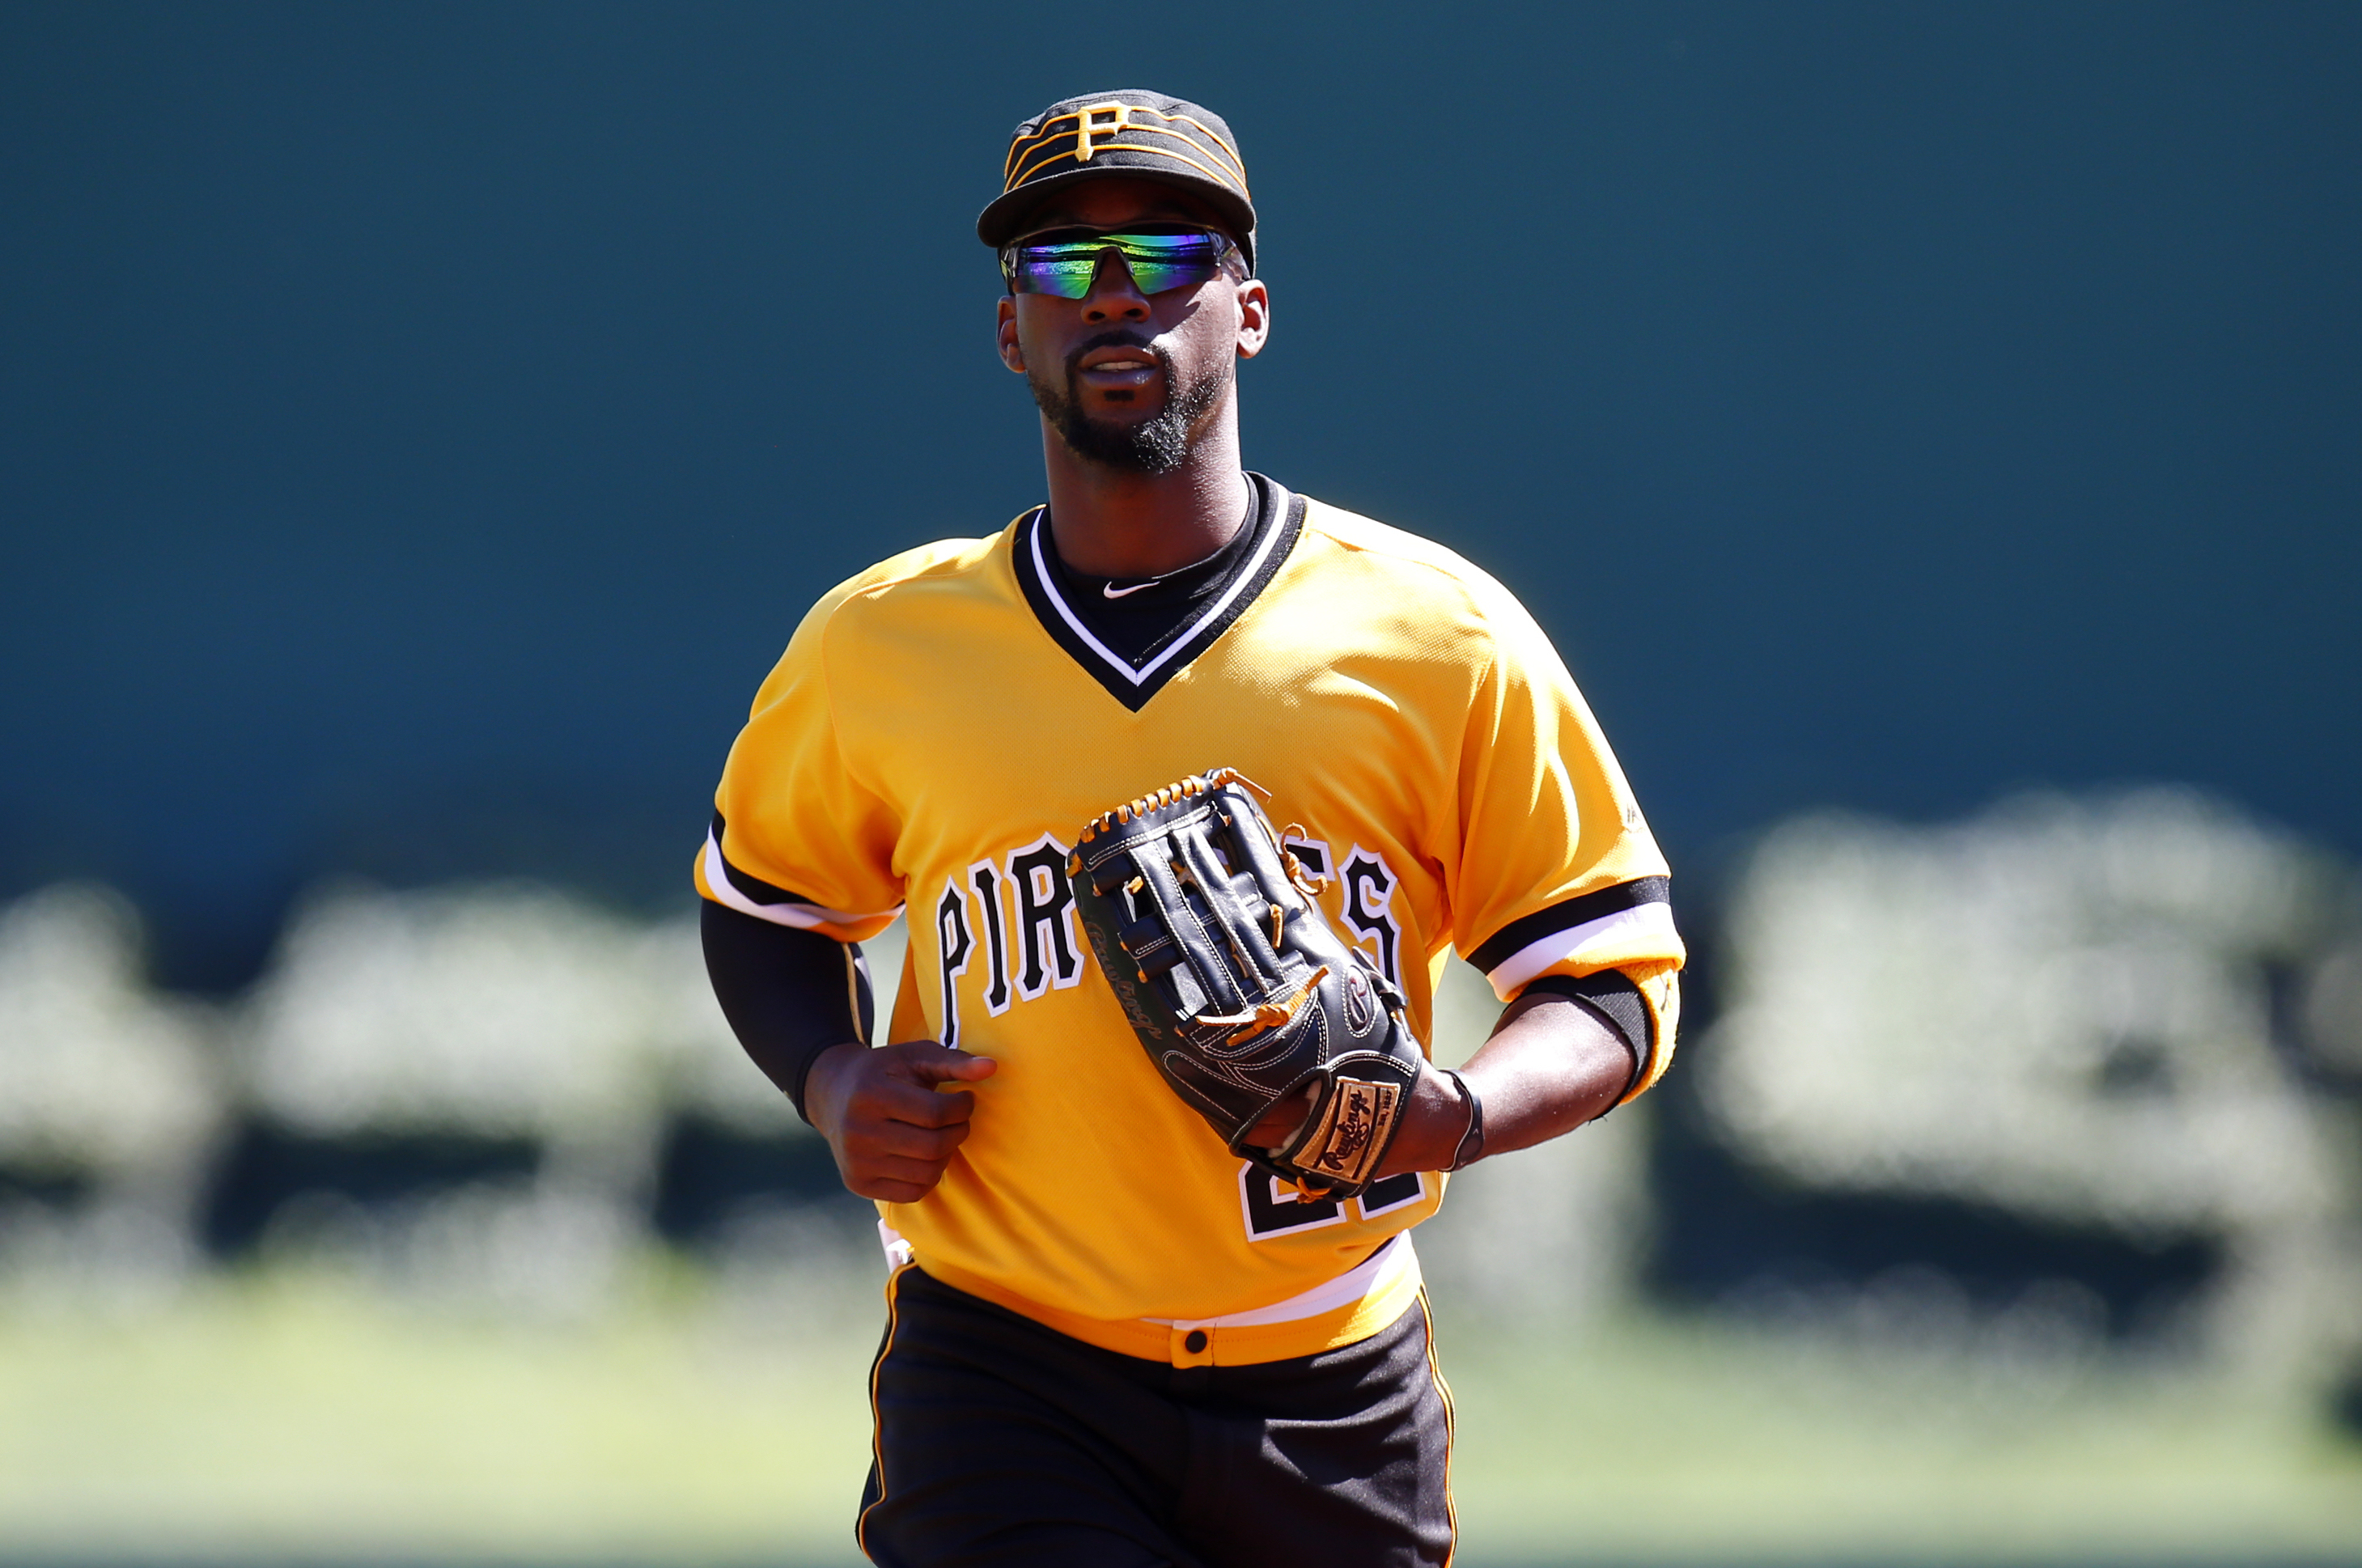 Andrew McCutchen Traded to Giants After 9 Years with Pirates